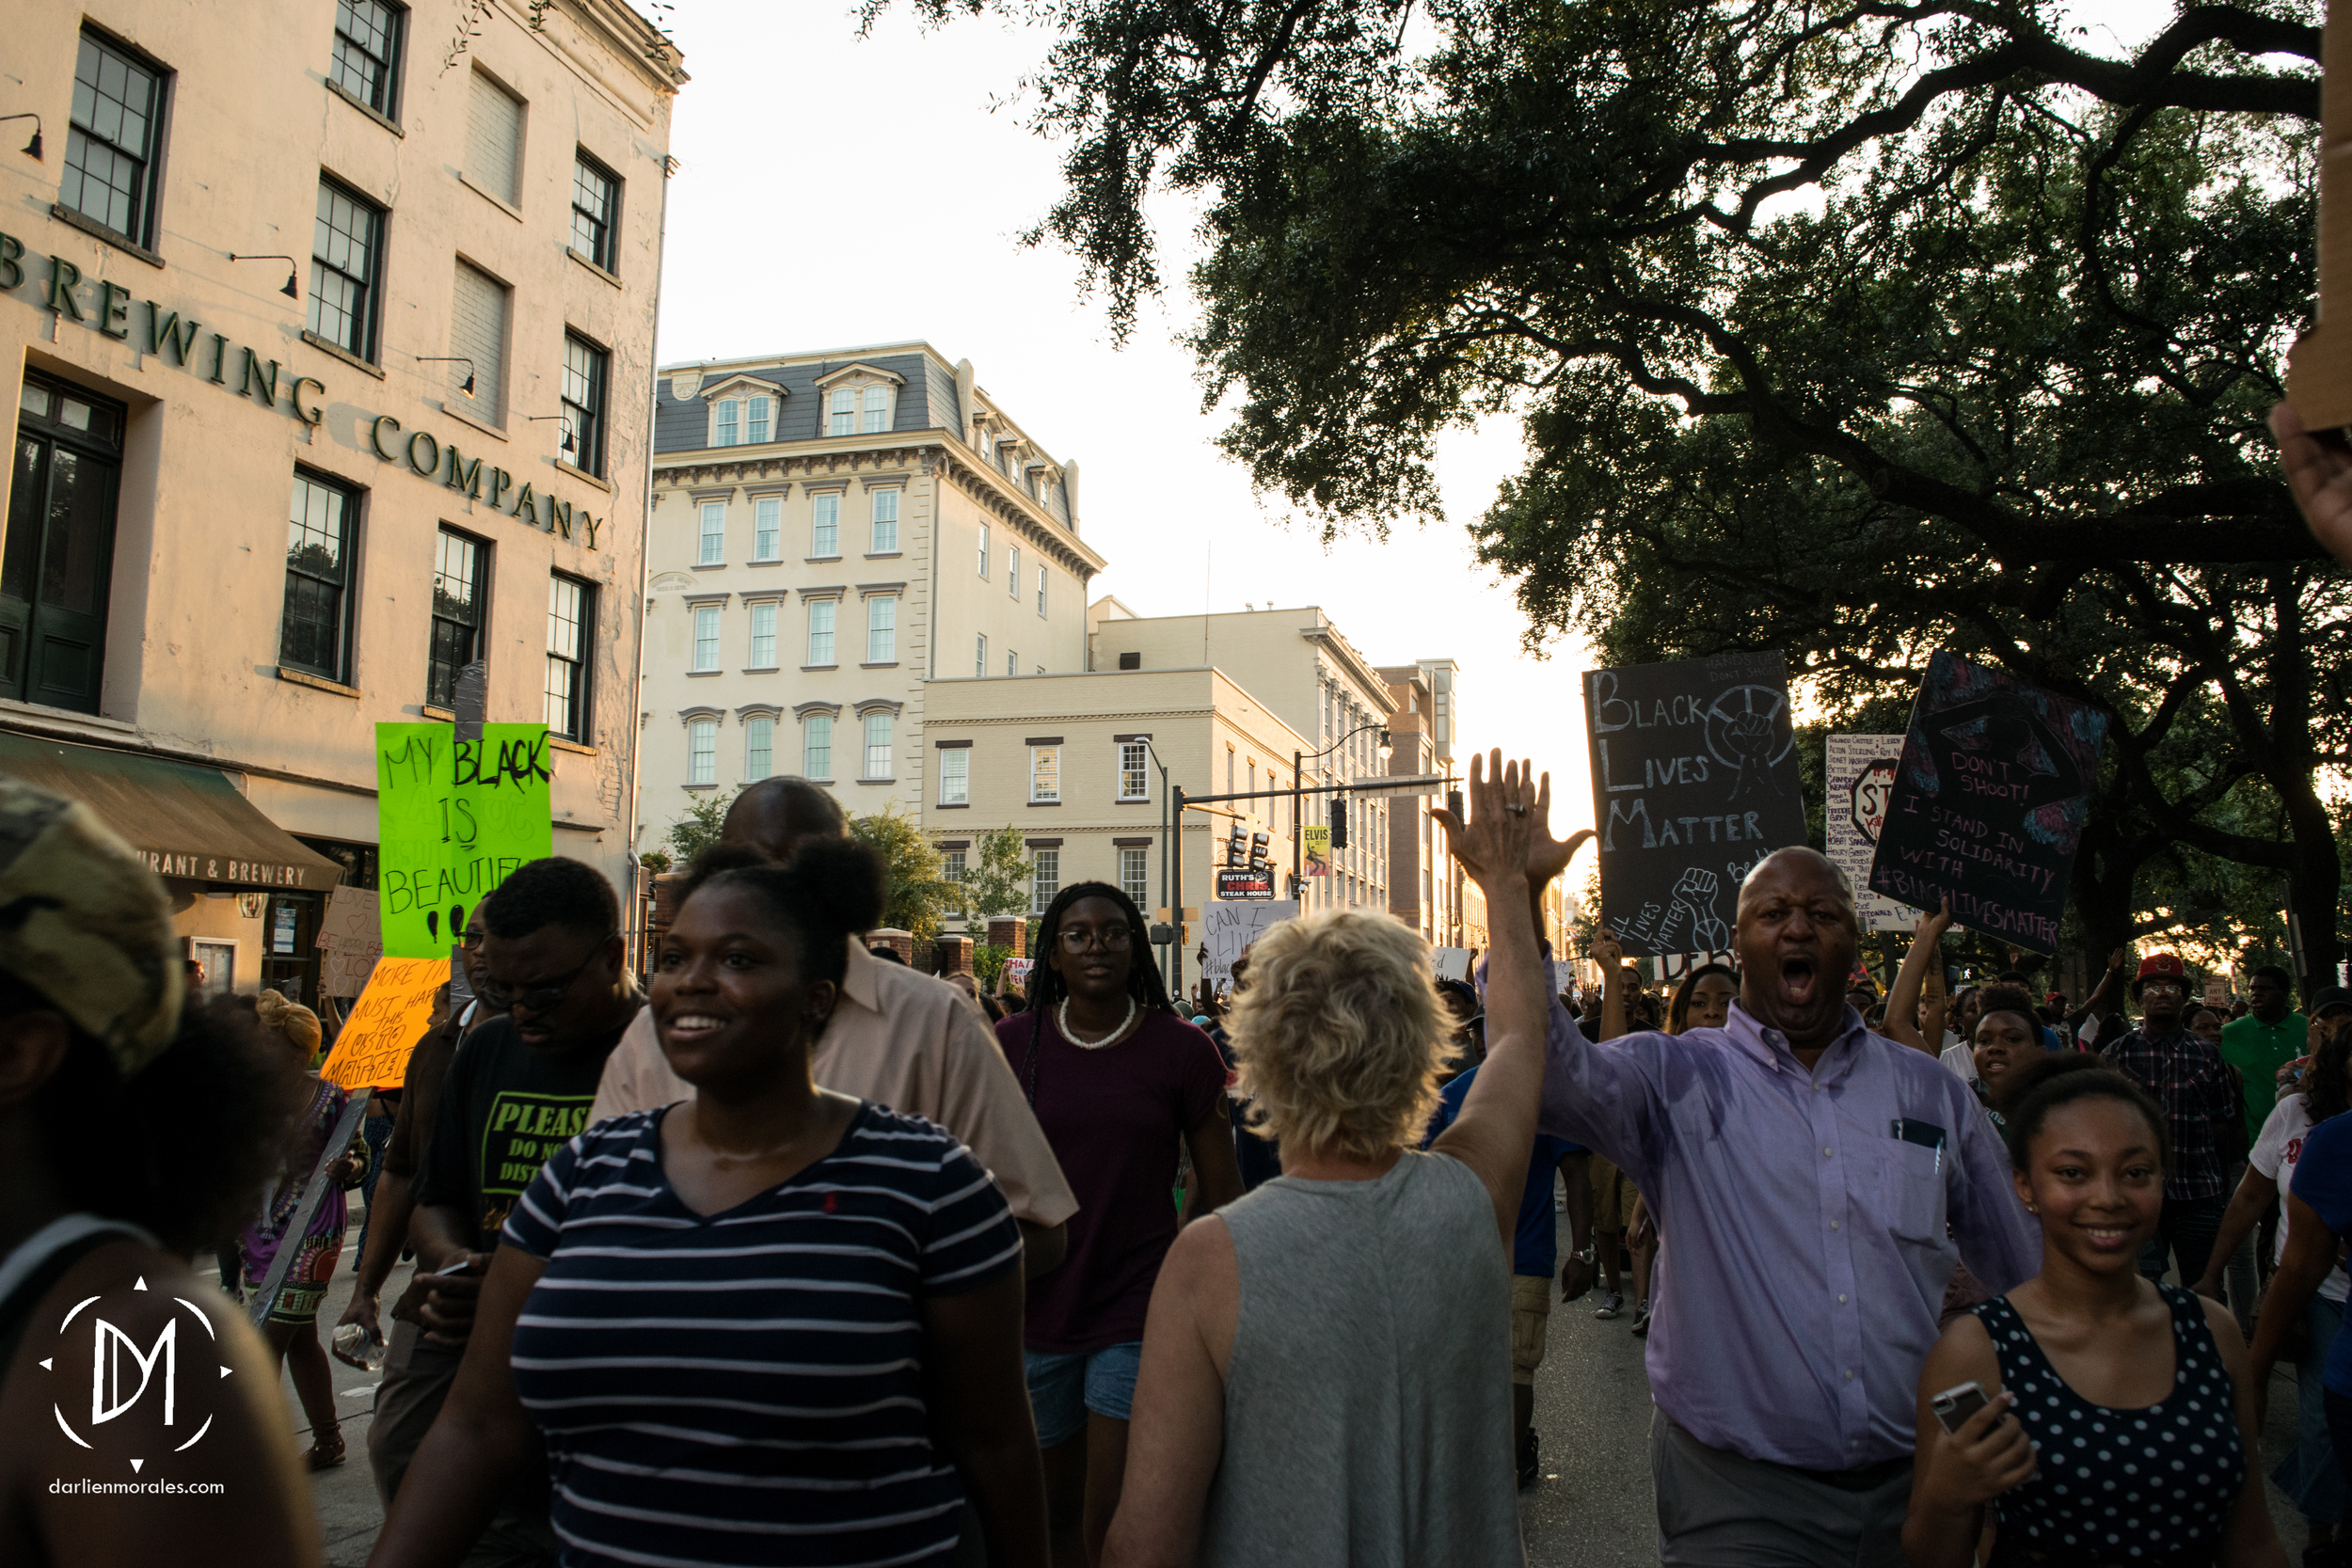   A women that is not part of the protest, stands in the middle of the crowd to high five people passing by.    -July 12, 2016  